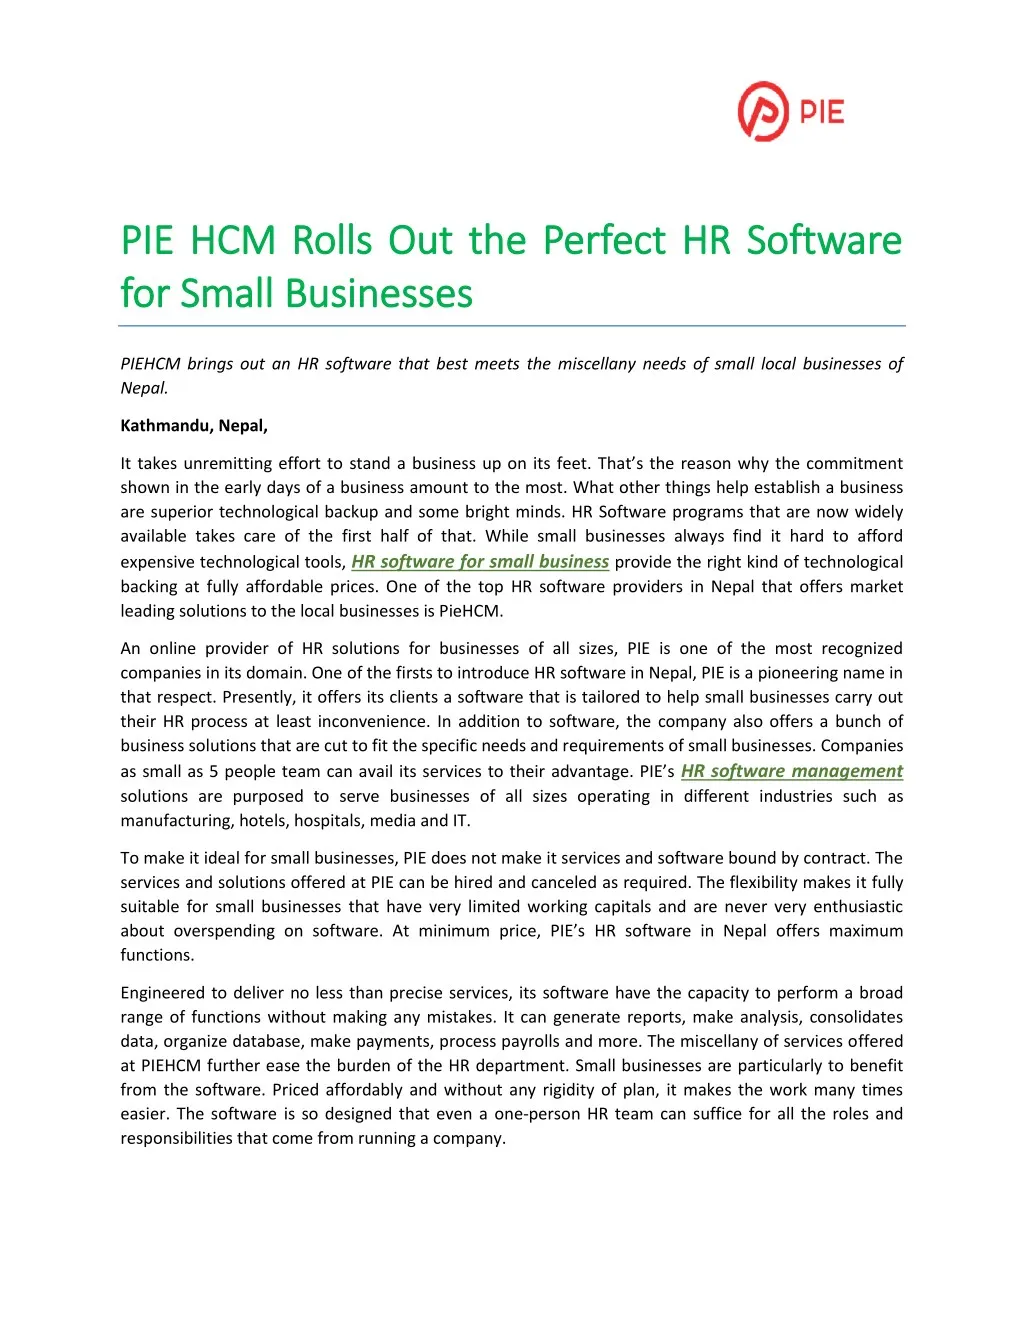 p pie ie hcm rolls out the perfect hr software